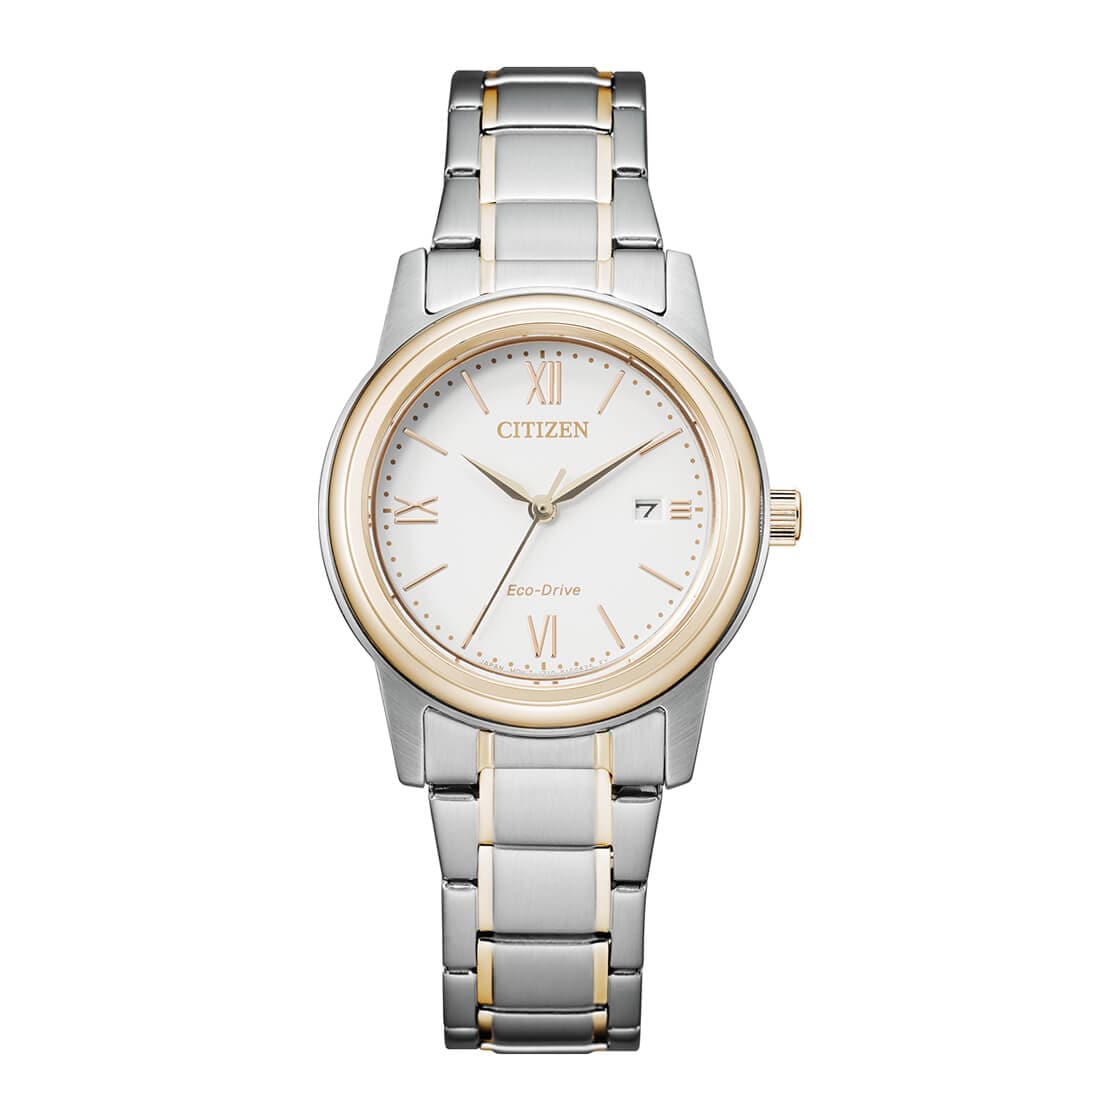 CITIZEN ECO-DRIVE LADIES WATCH WHITE DIAL - FE1226-82A - Kamal Watch Company